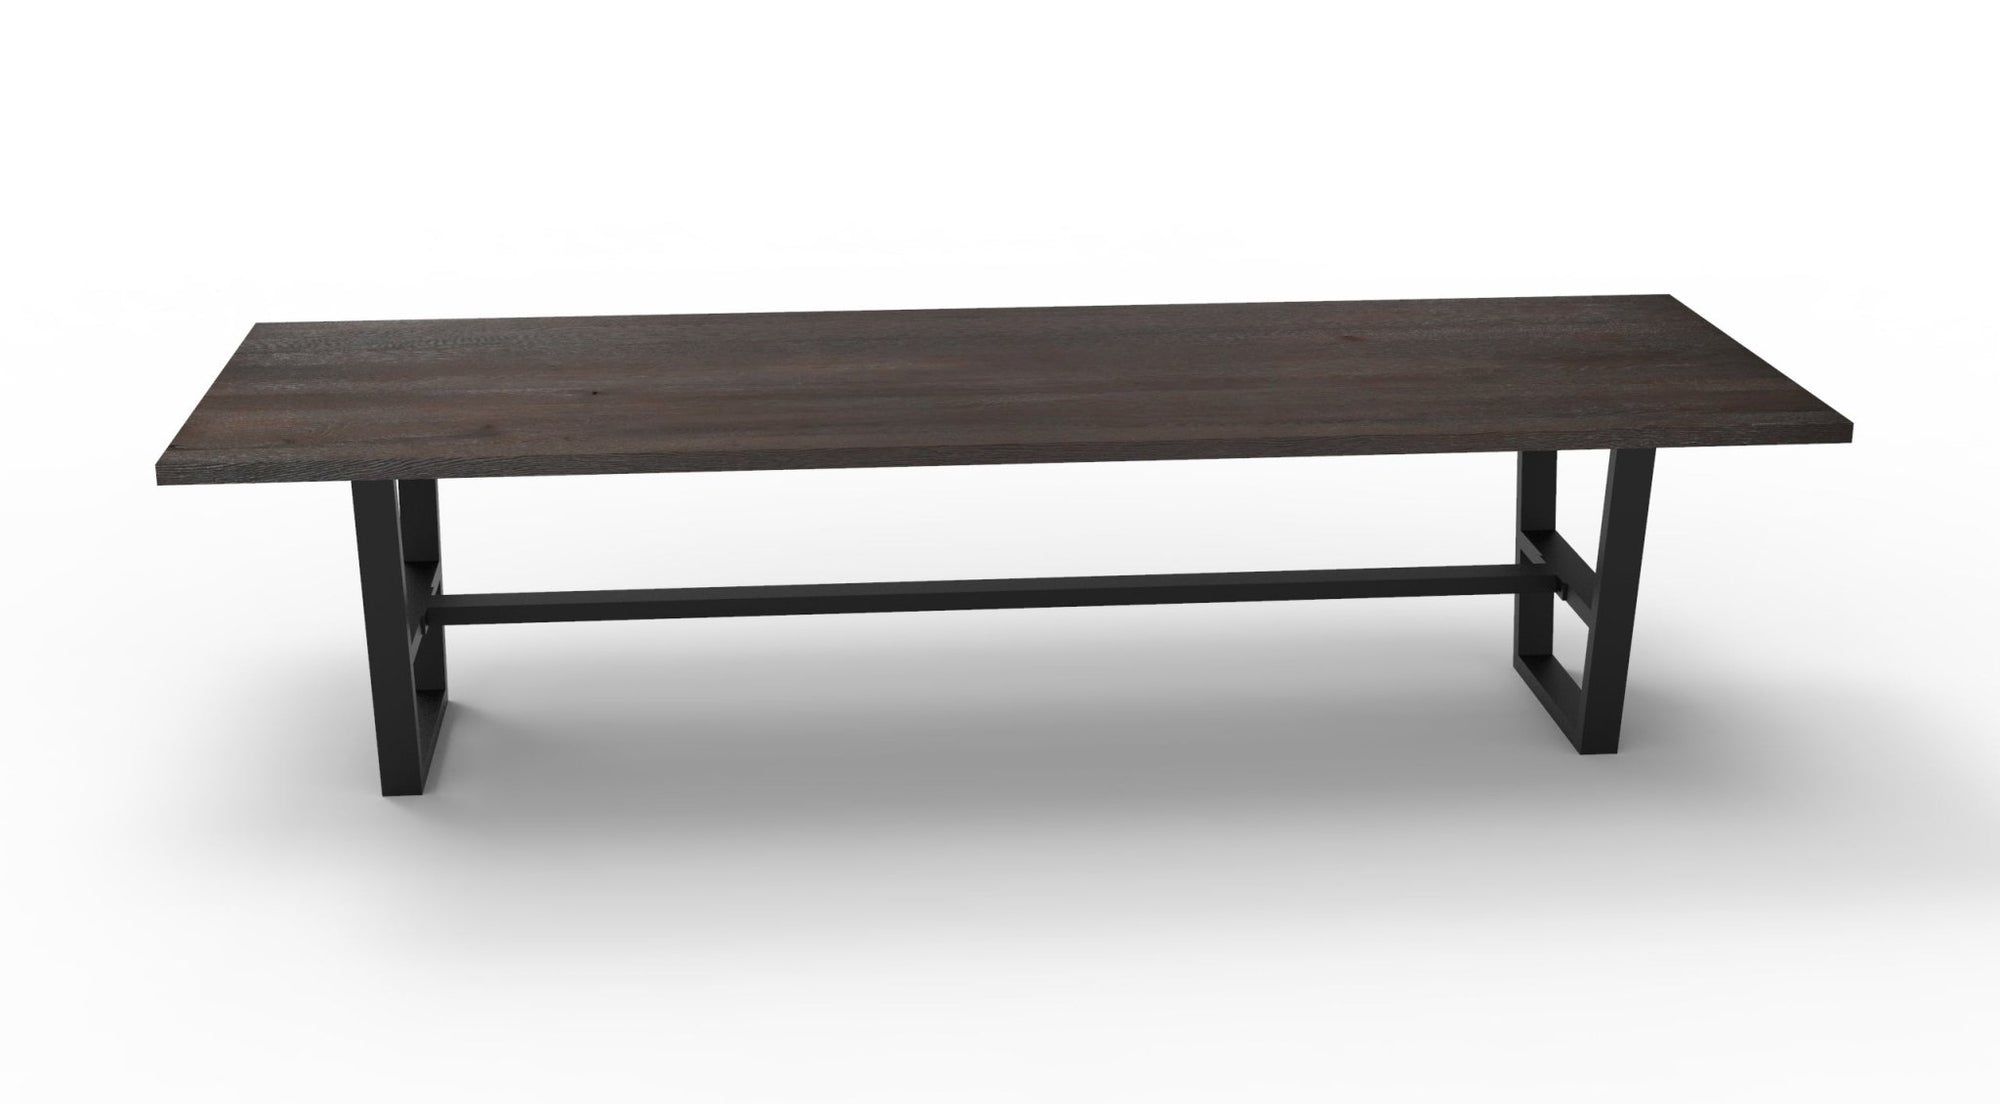 Wallace 120" Oak Dining Table - Sandblasted Black - snyders.furniture